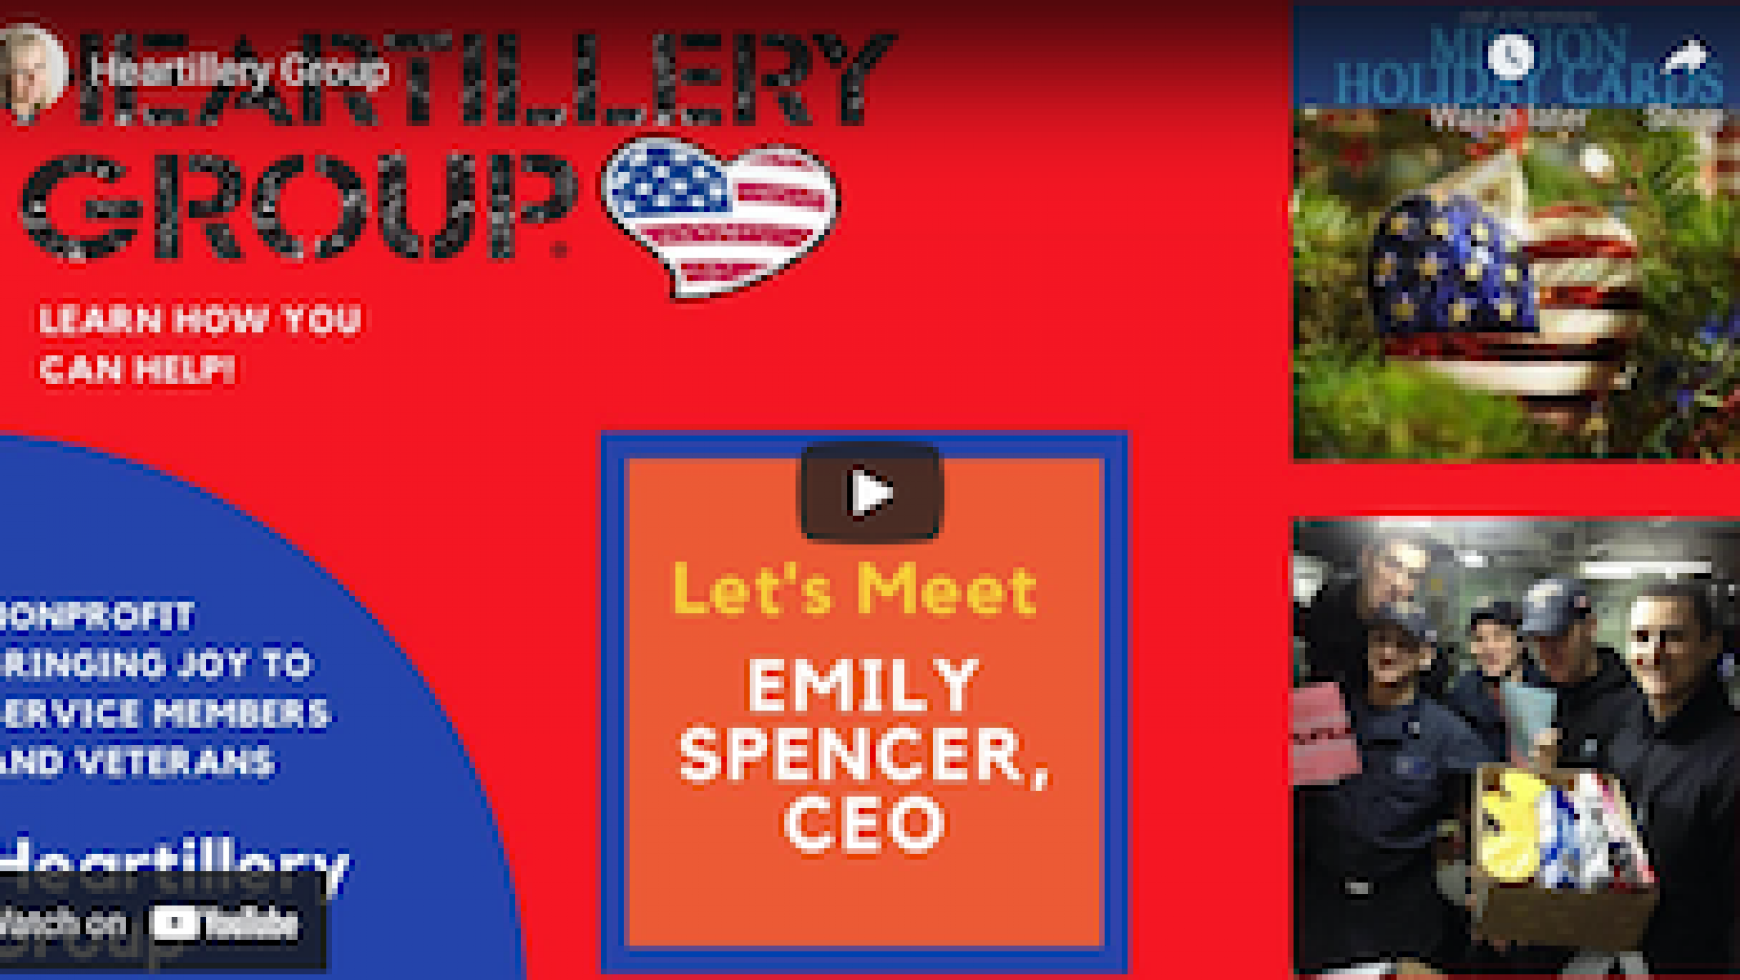 Let’s Meet Emily Spencer, CEO of Heartillery Group to Learn How You Can Help in Ponte Vedra FL (VIDEO)